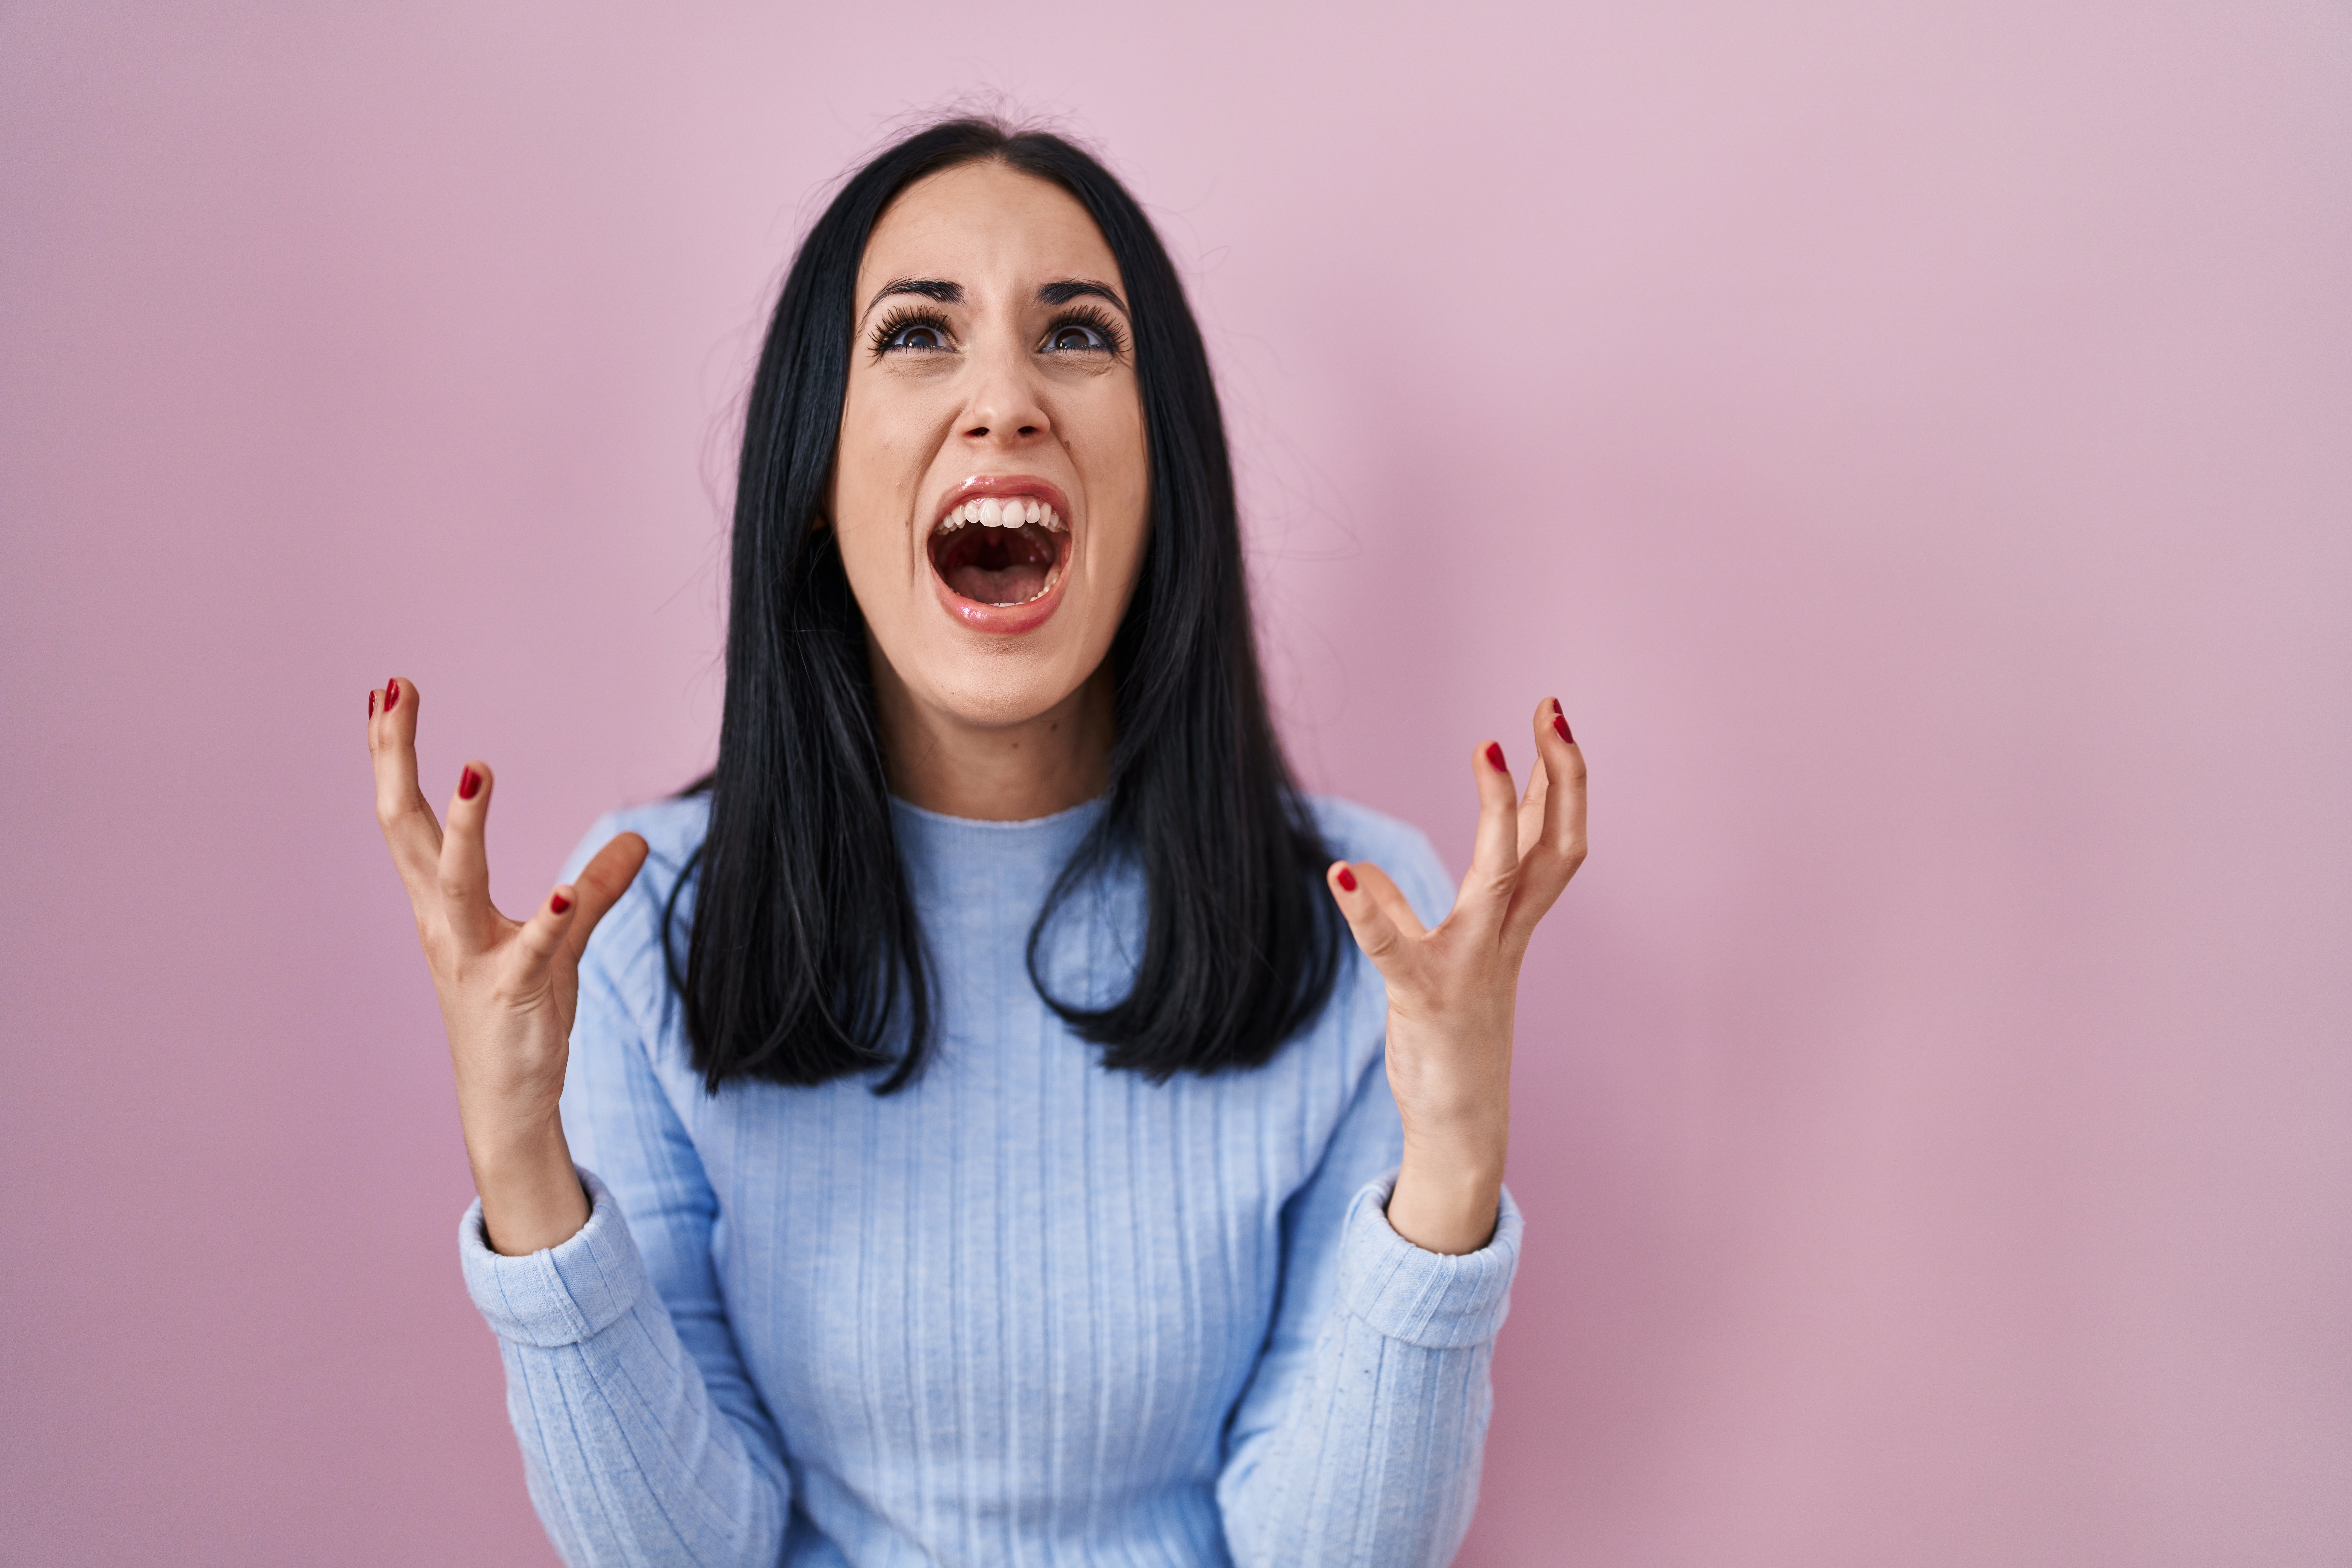 Woman in anger | Source: Shutterstock